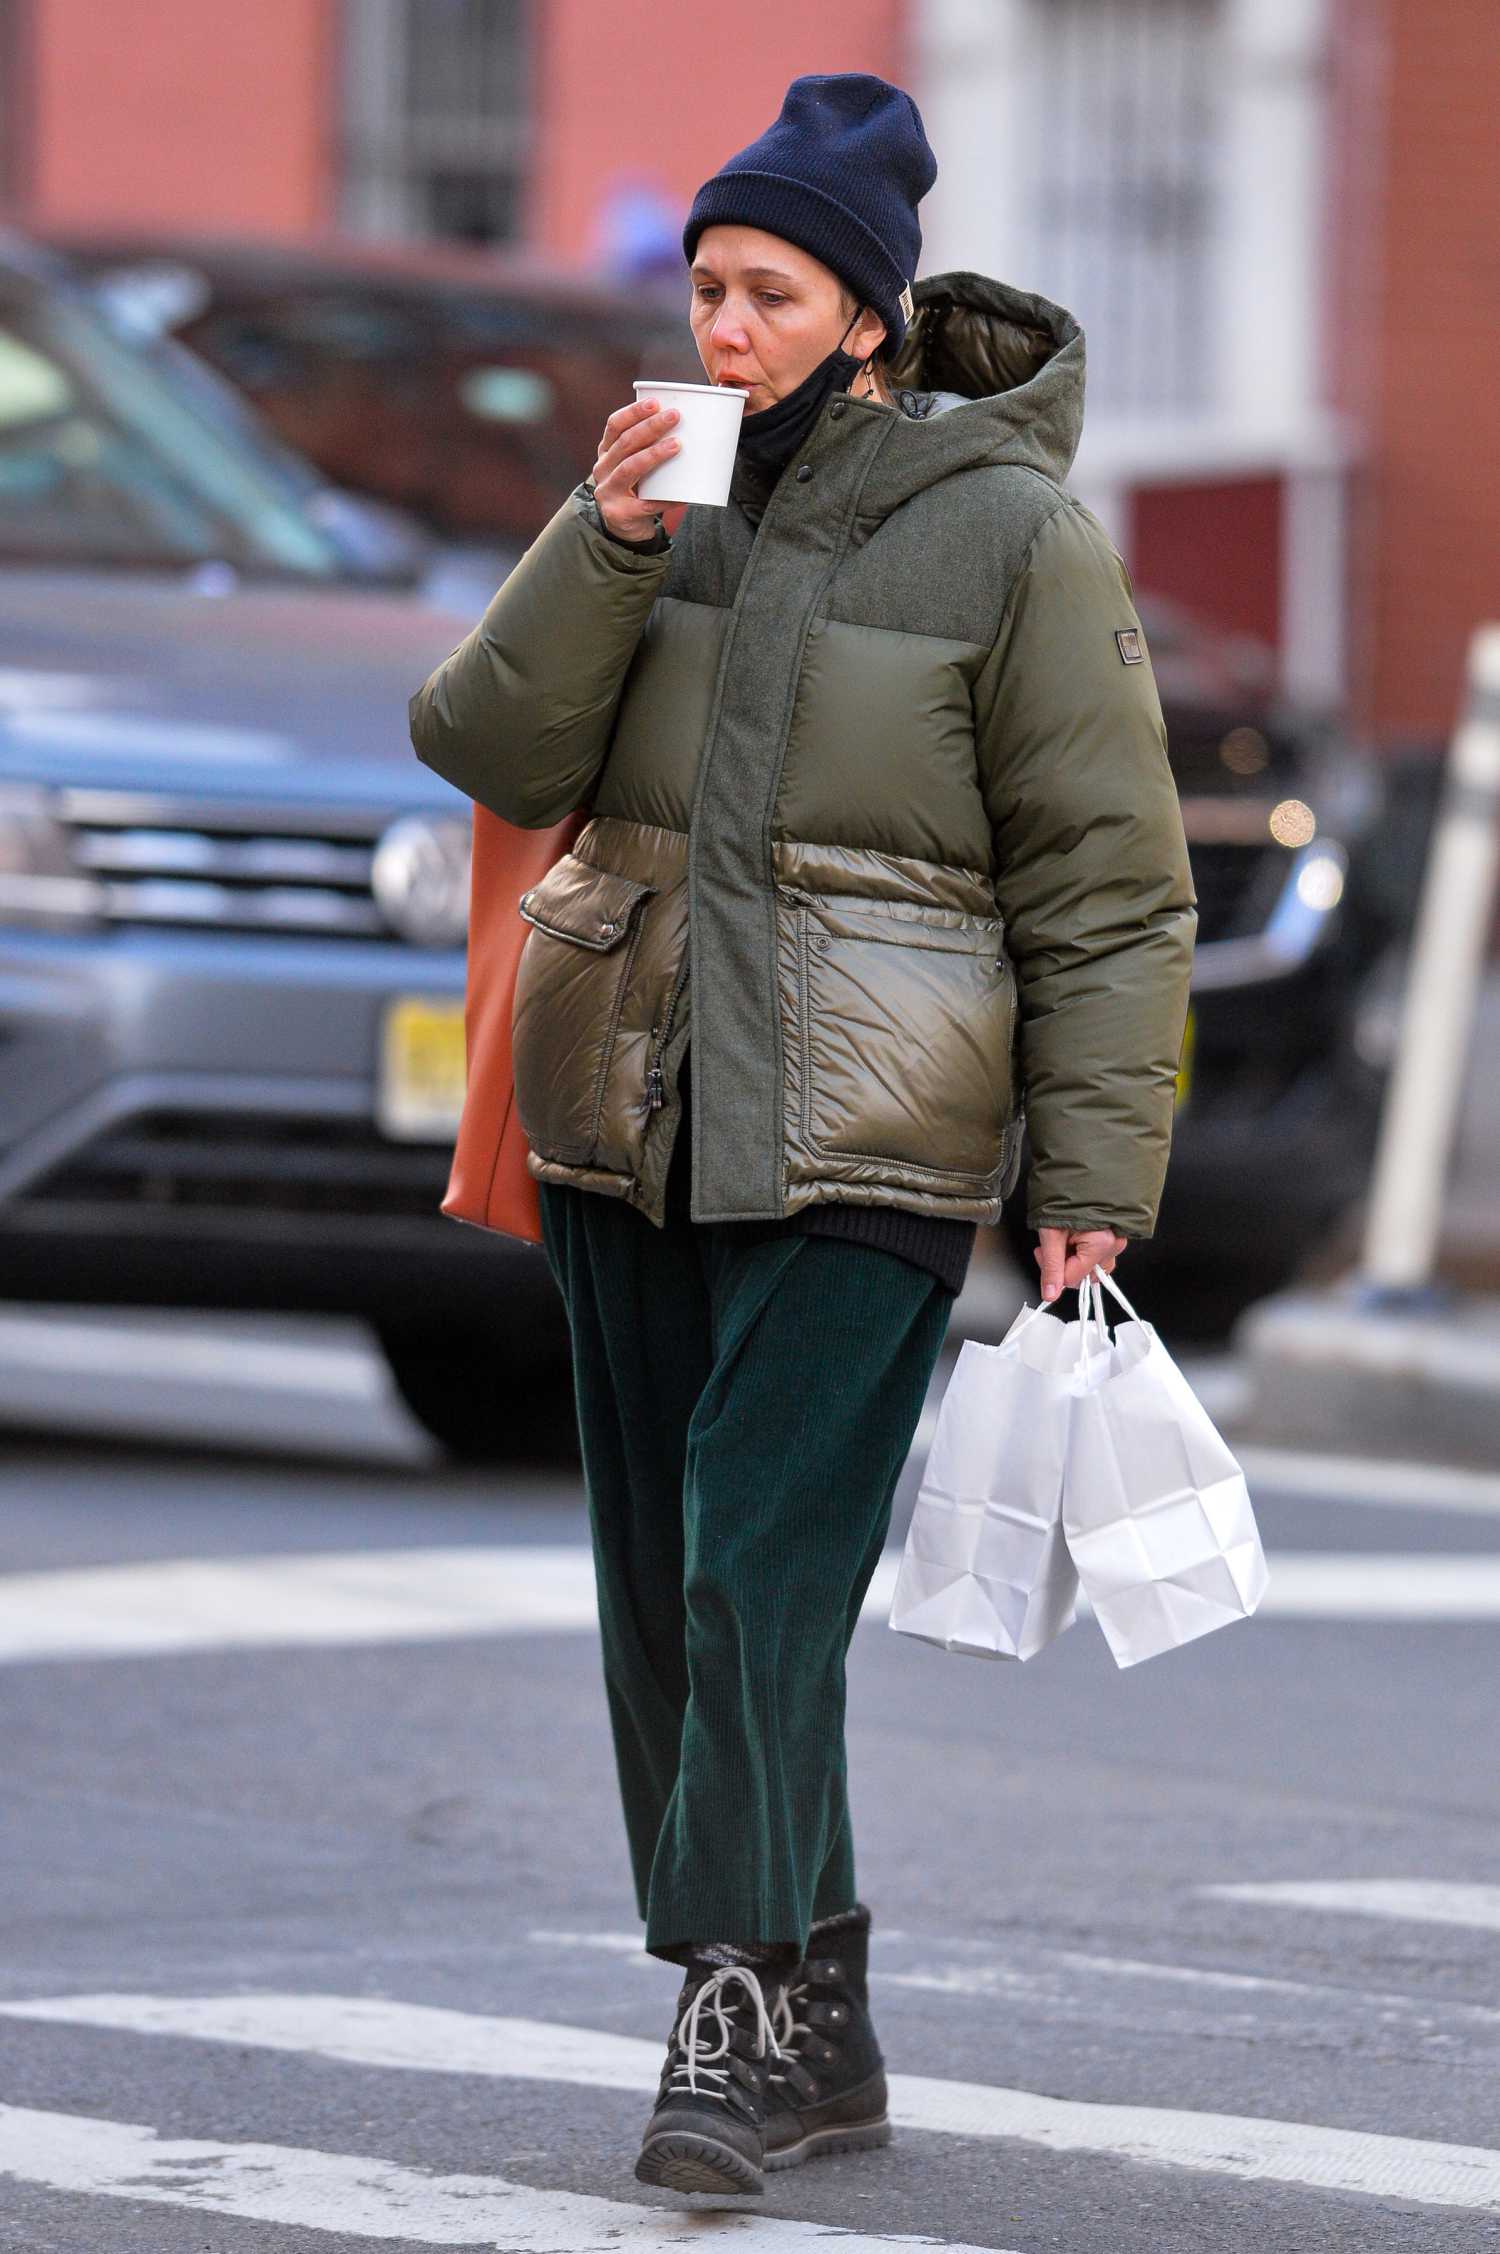 Maggie Gyllenhaal in a Blue Knit Hat Was Seen Out in Manhattan, NYC ...